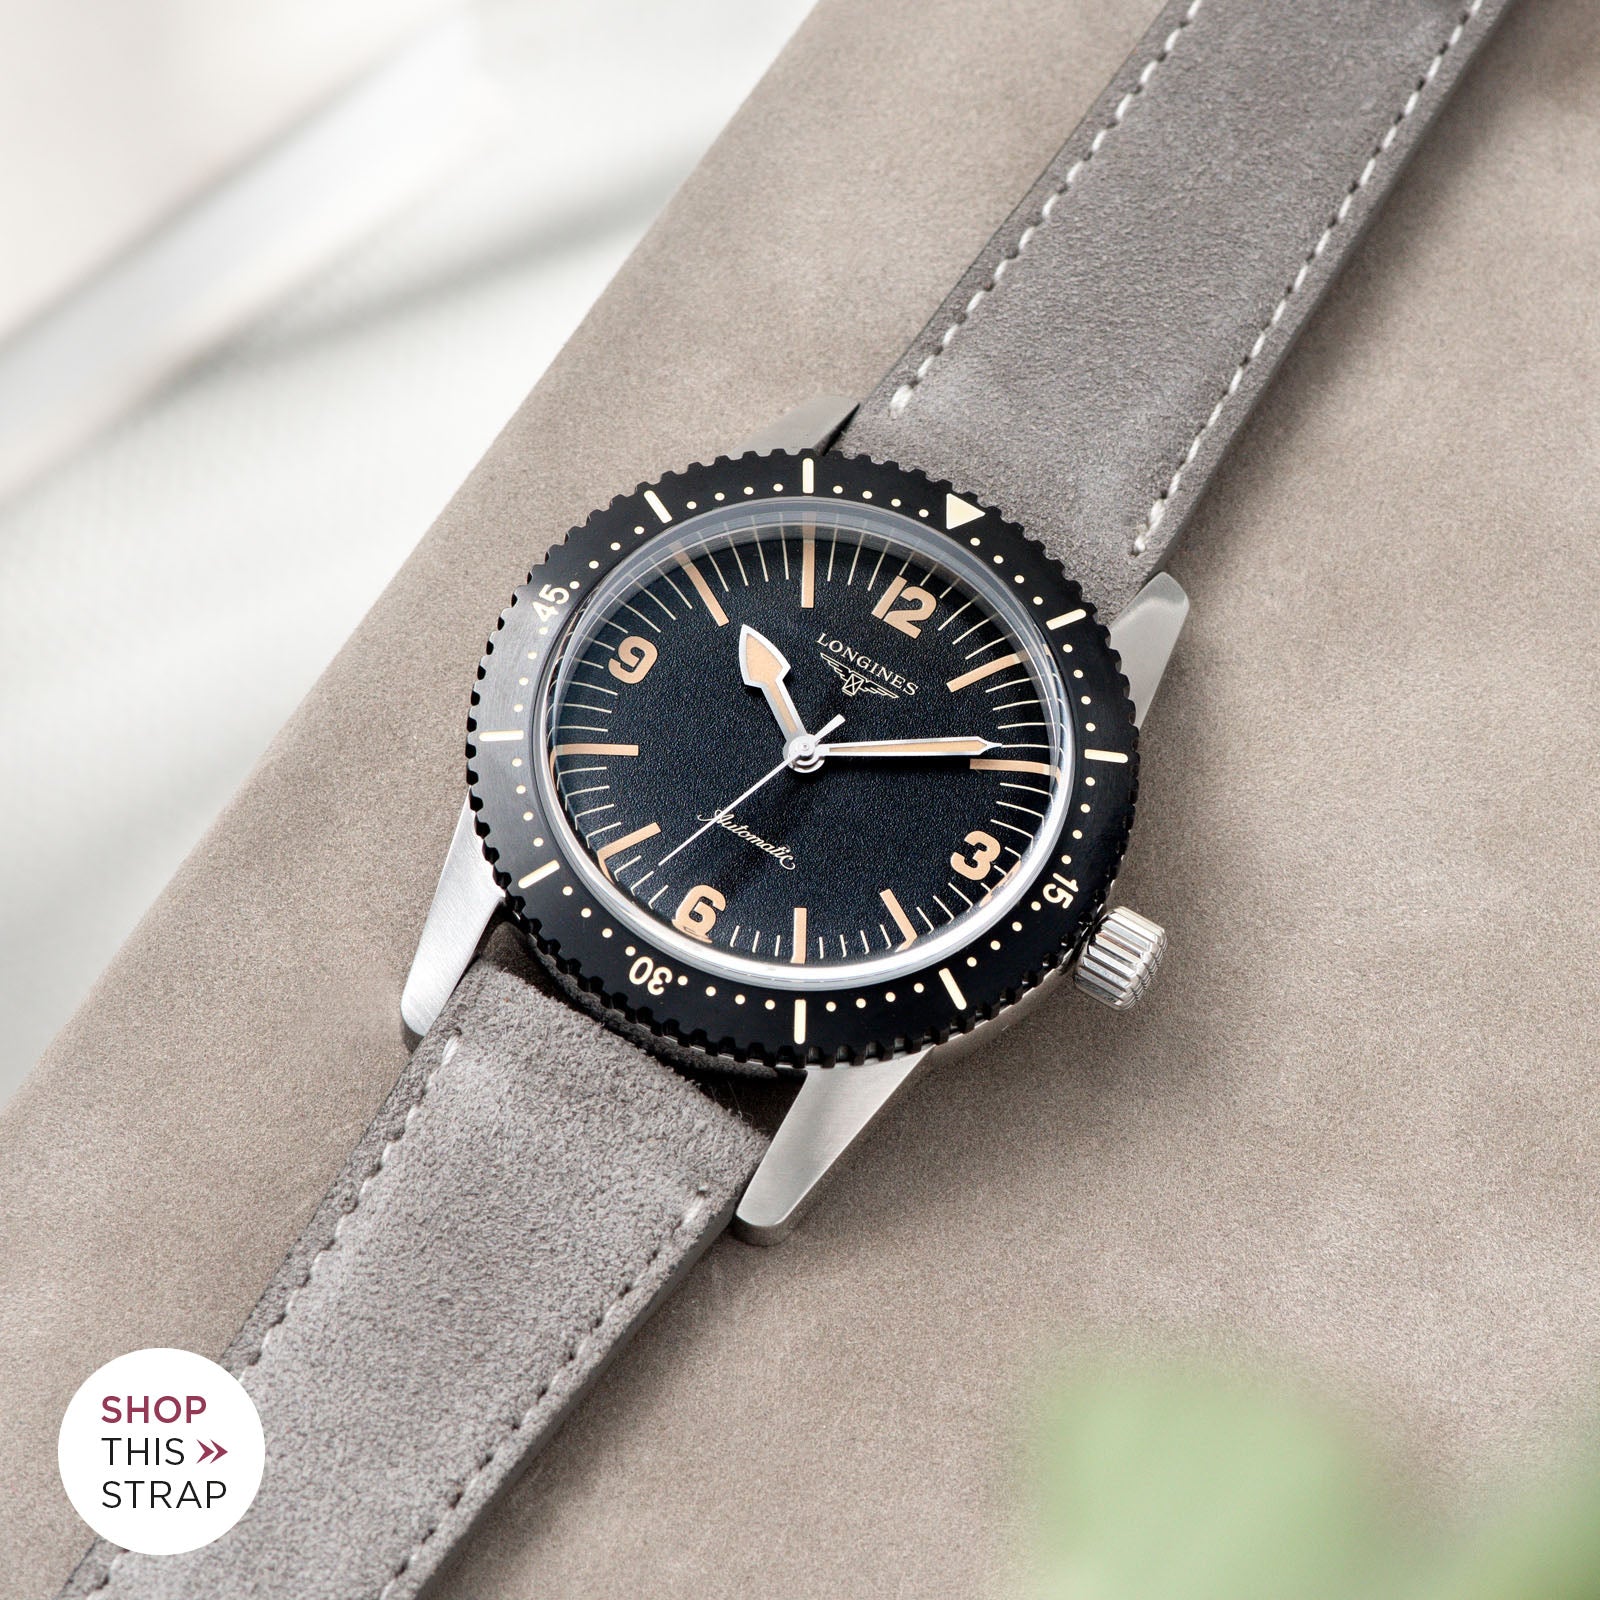 Bulang and Sons_Strap Guide_Longines Skin Diver_Harbor Grey Silky Suede Leather Watch Strap